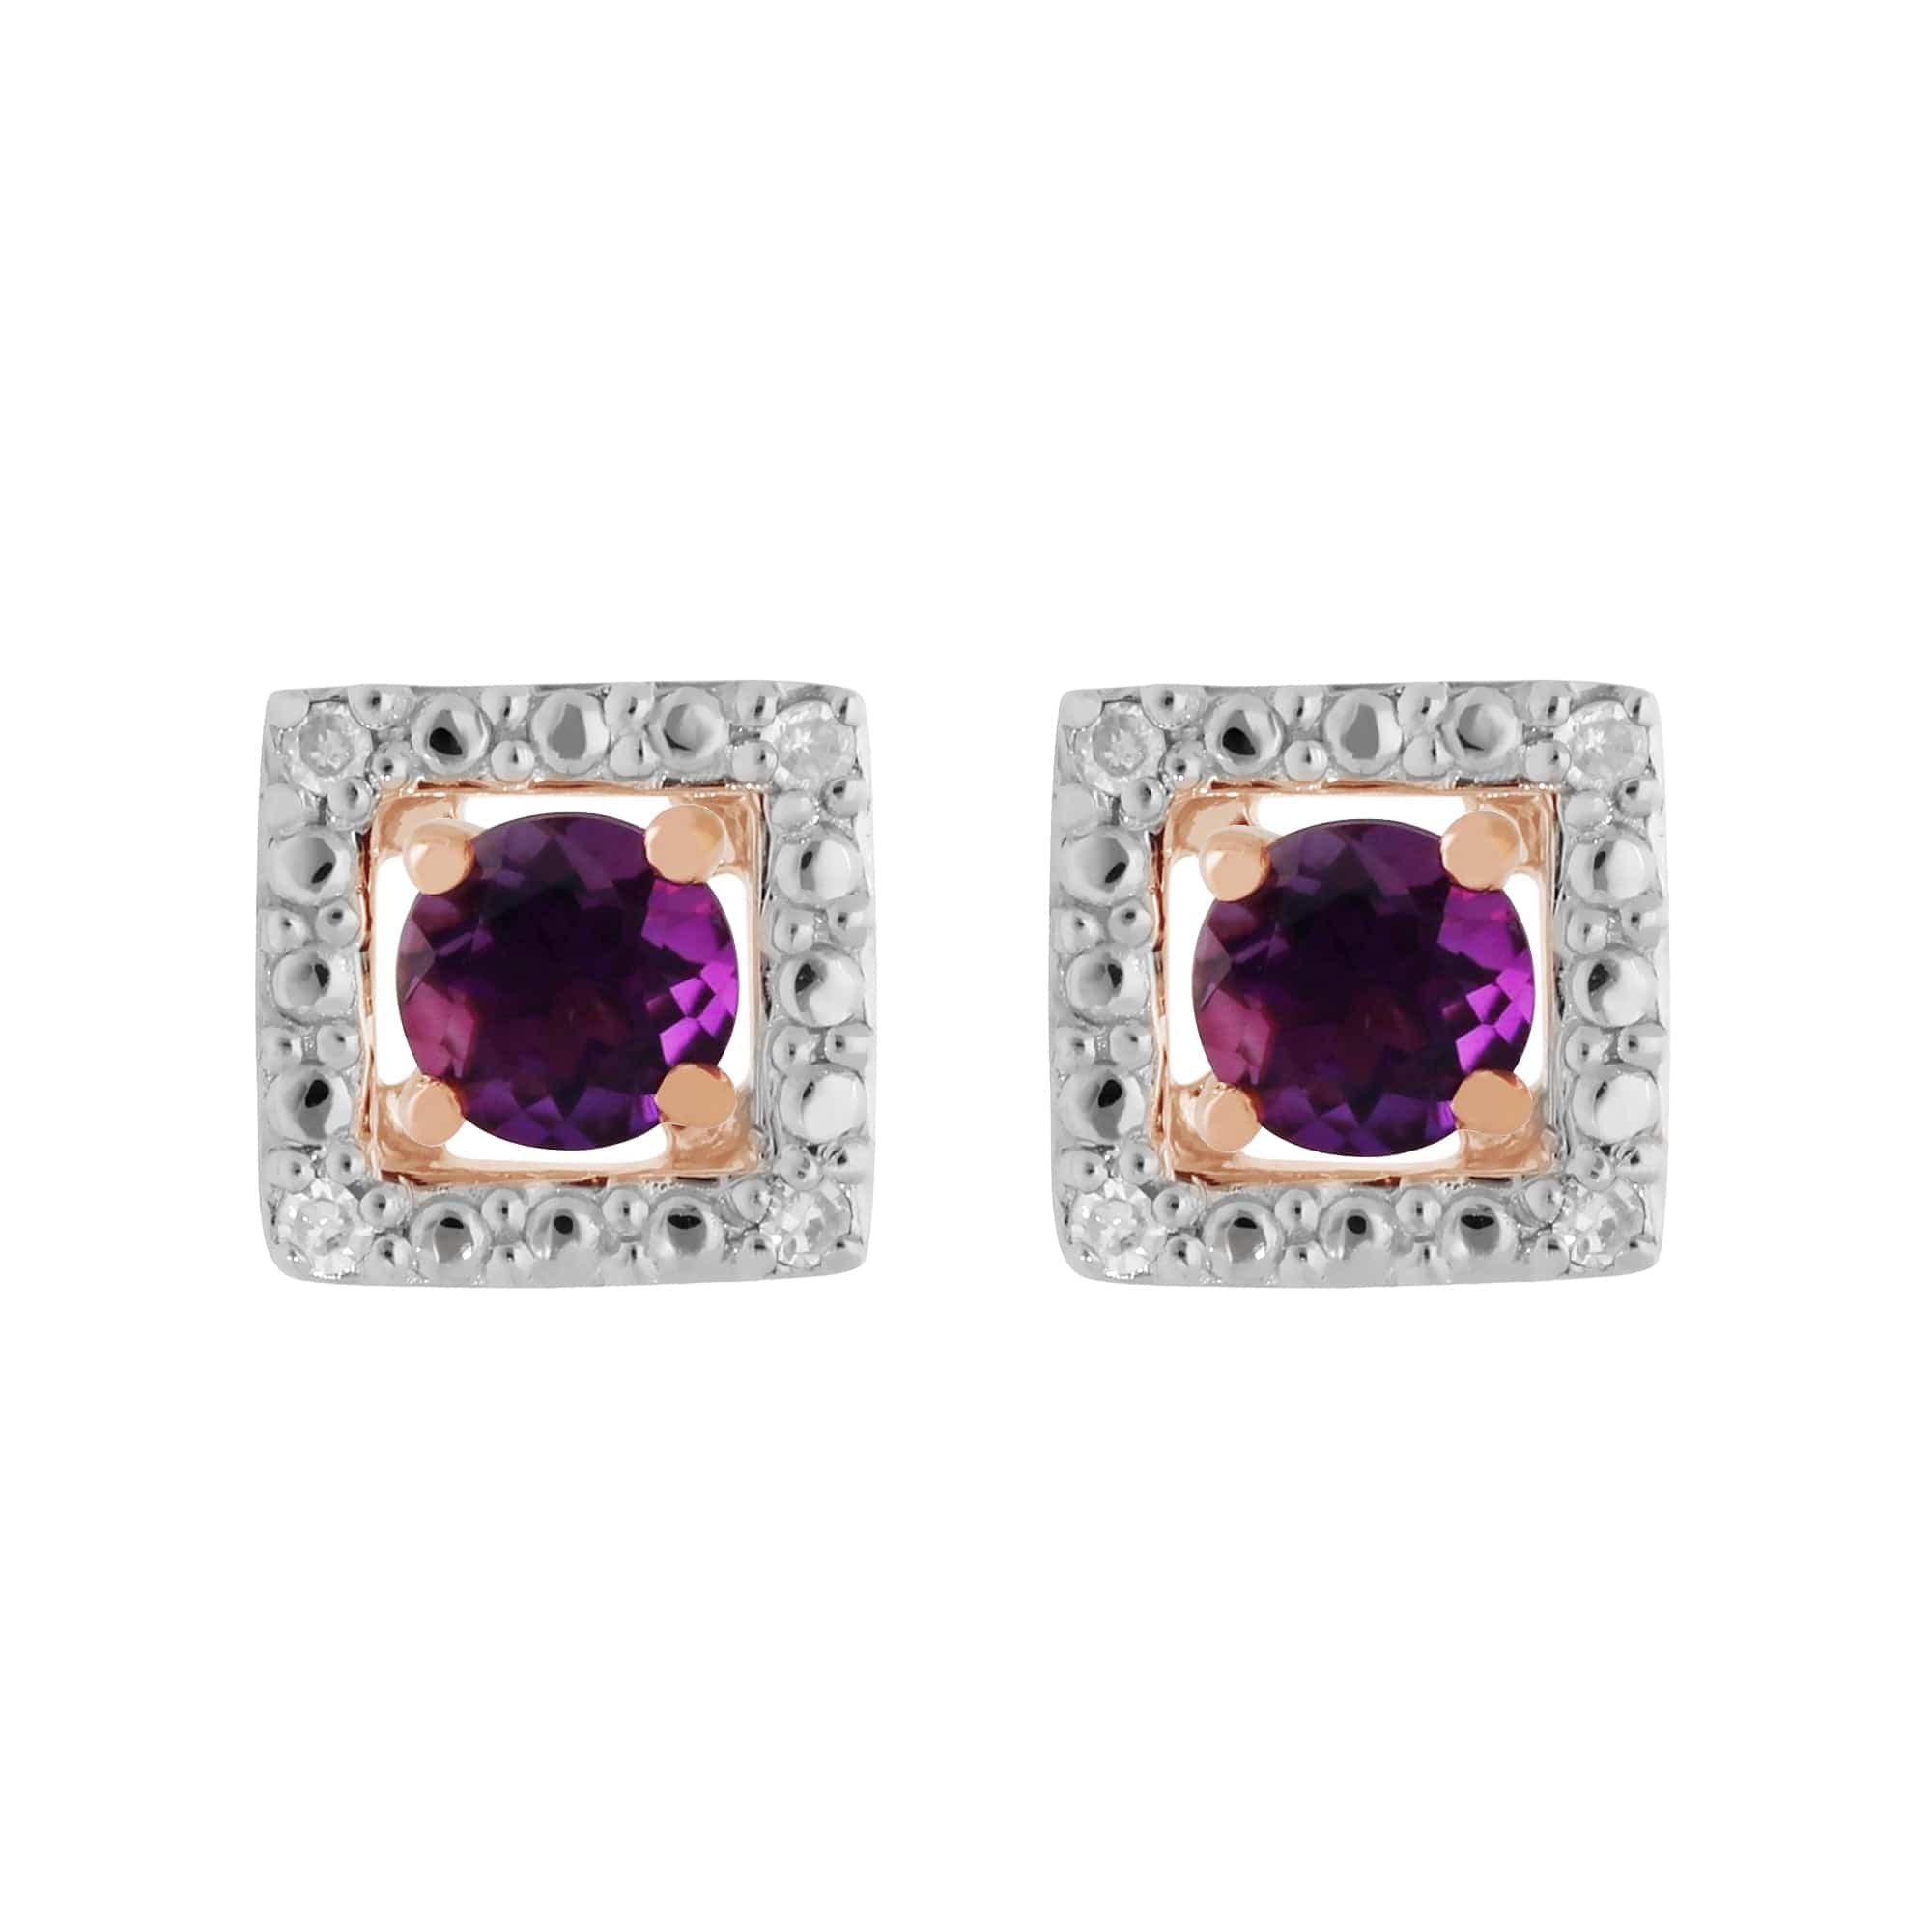 183E4316059-191E0380019 Classic Round Amethyst Stud Earrings with Detachable Diamond Square Ear Jacket in 9ct Rose Gold 1